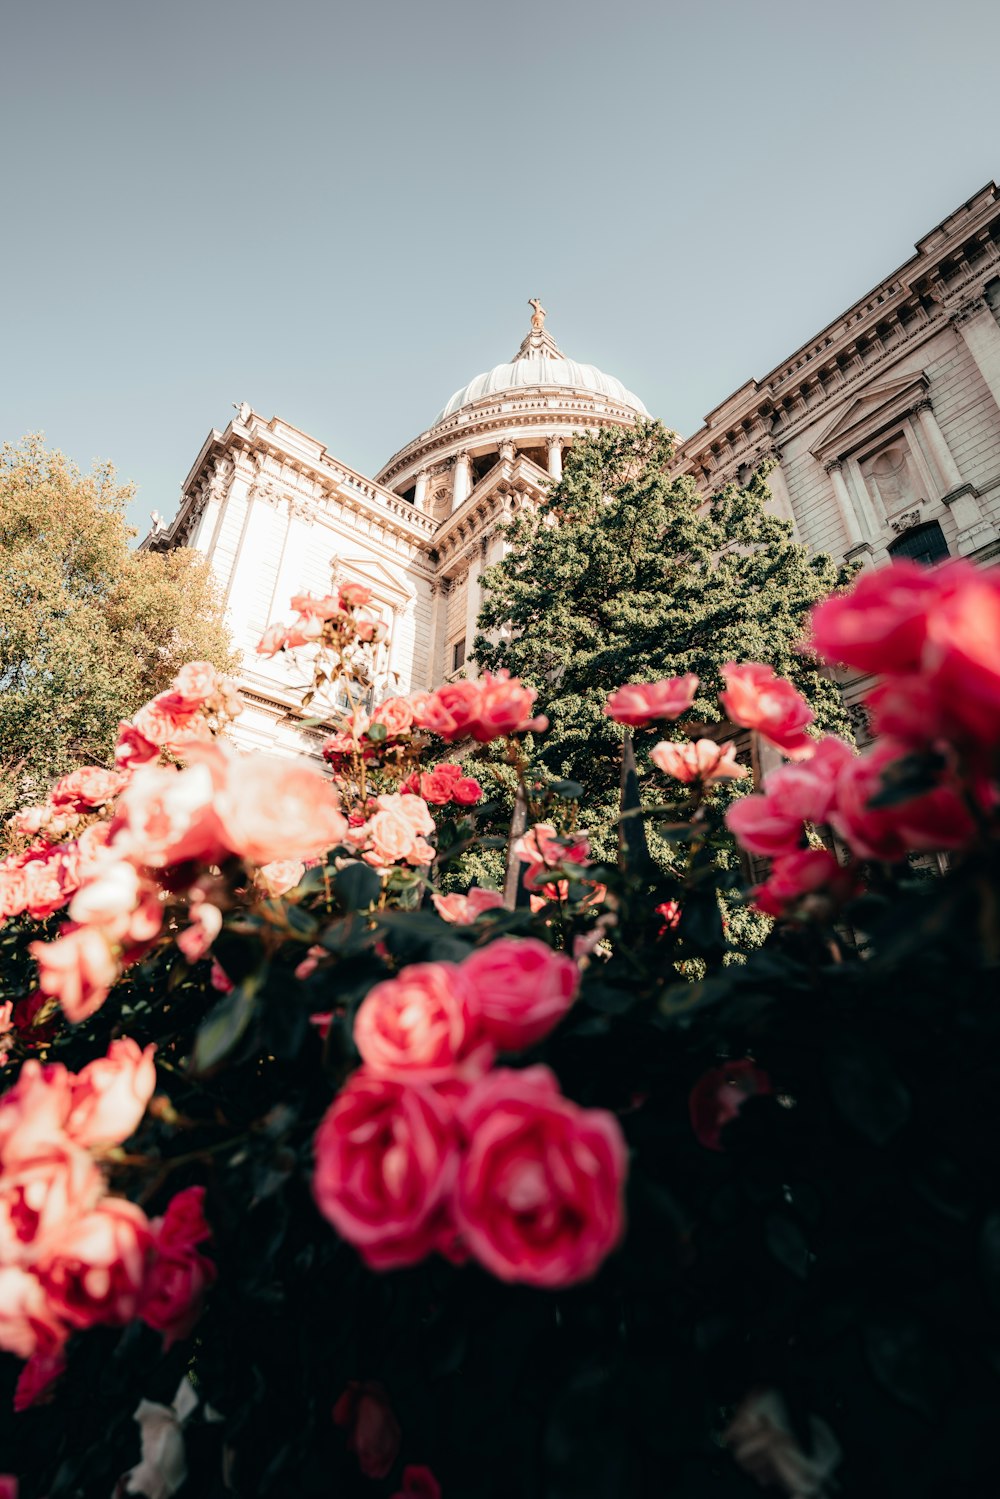 pink flowers in front of a building with a dome in the background